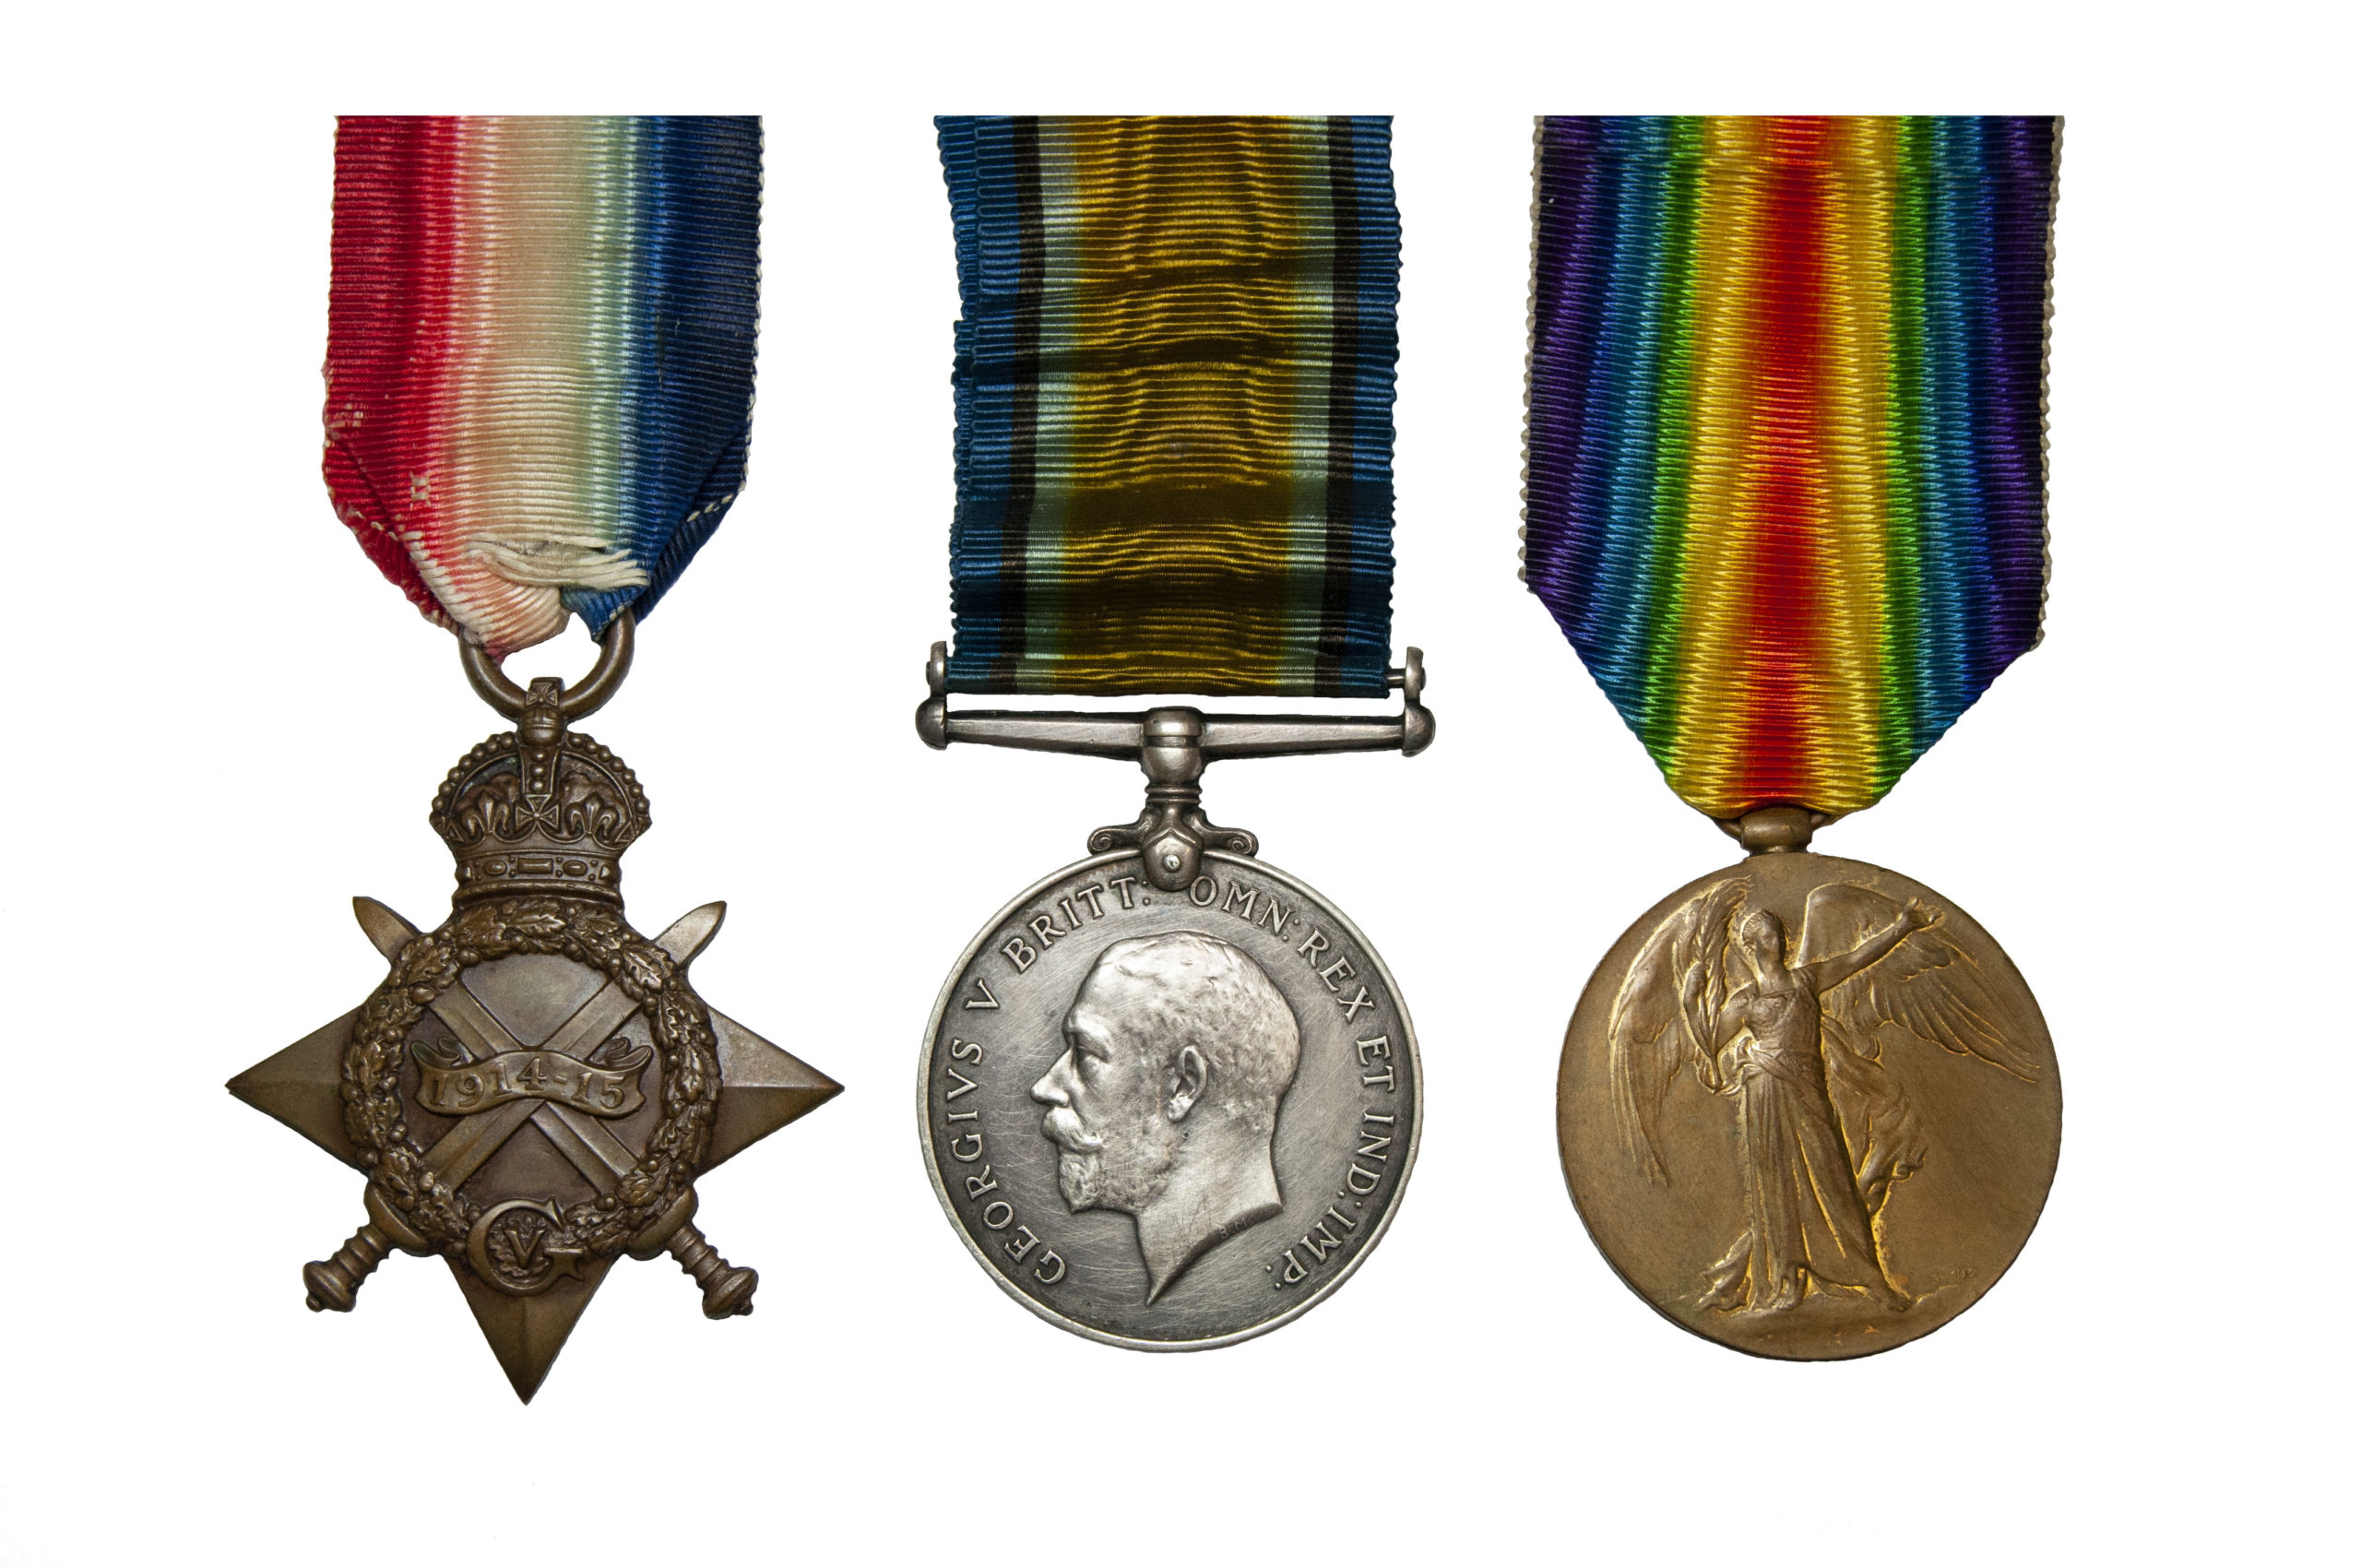 1914 Group of 3, Victory Medal to Pte J Houghton